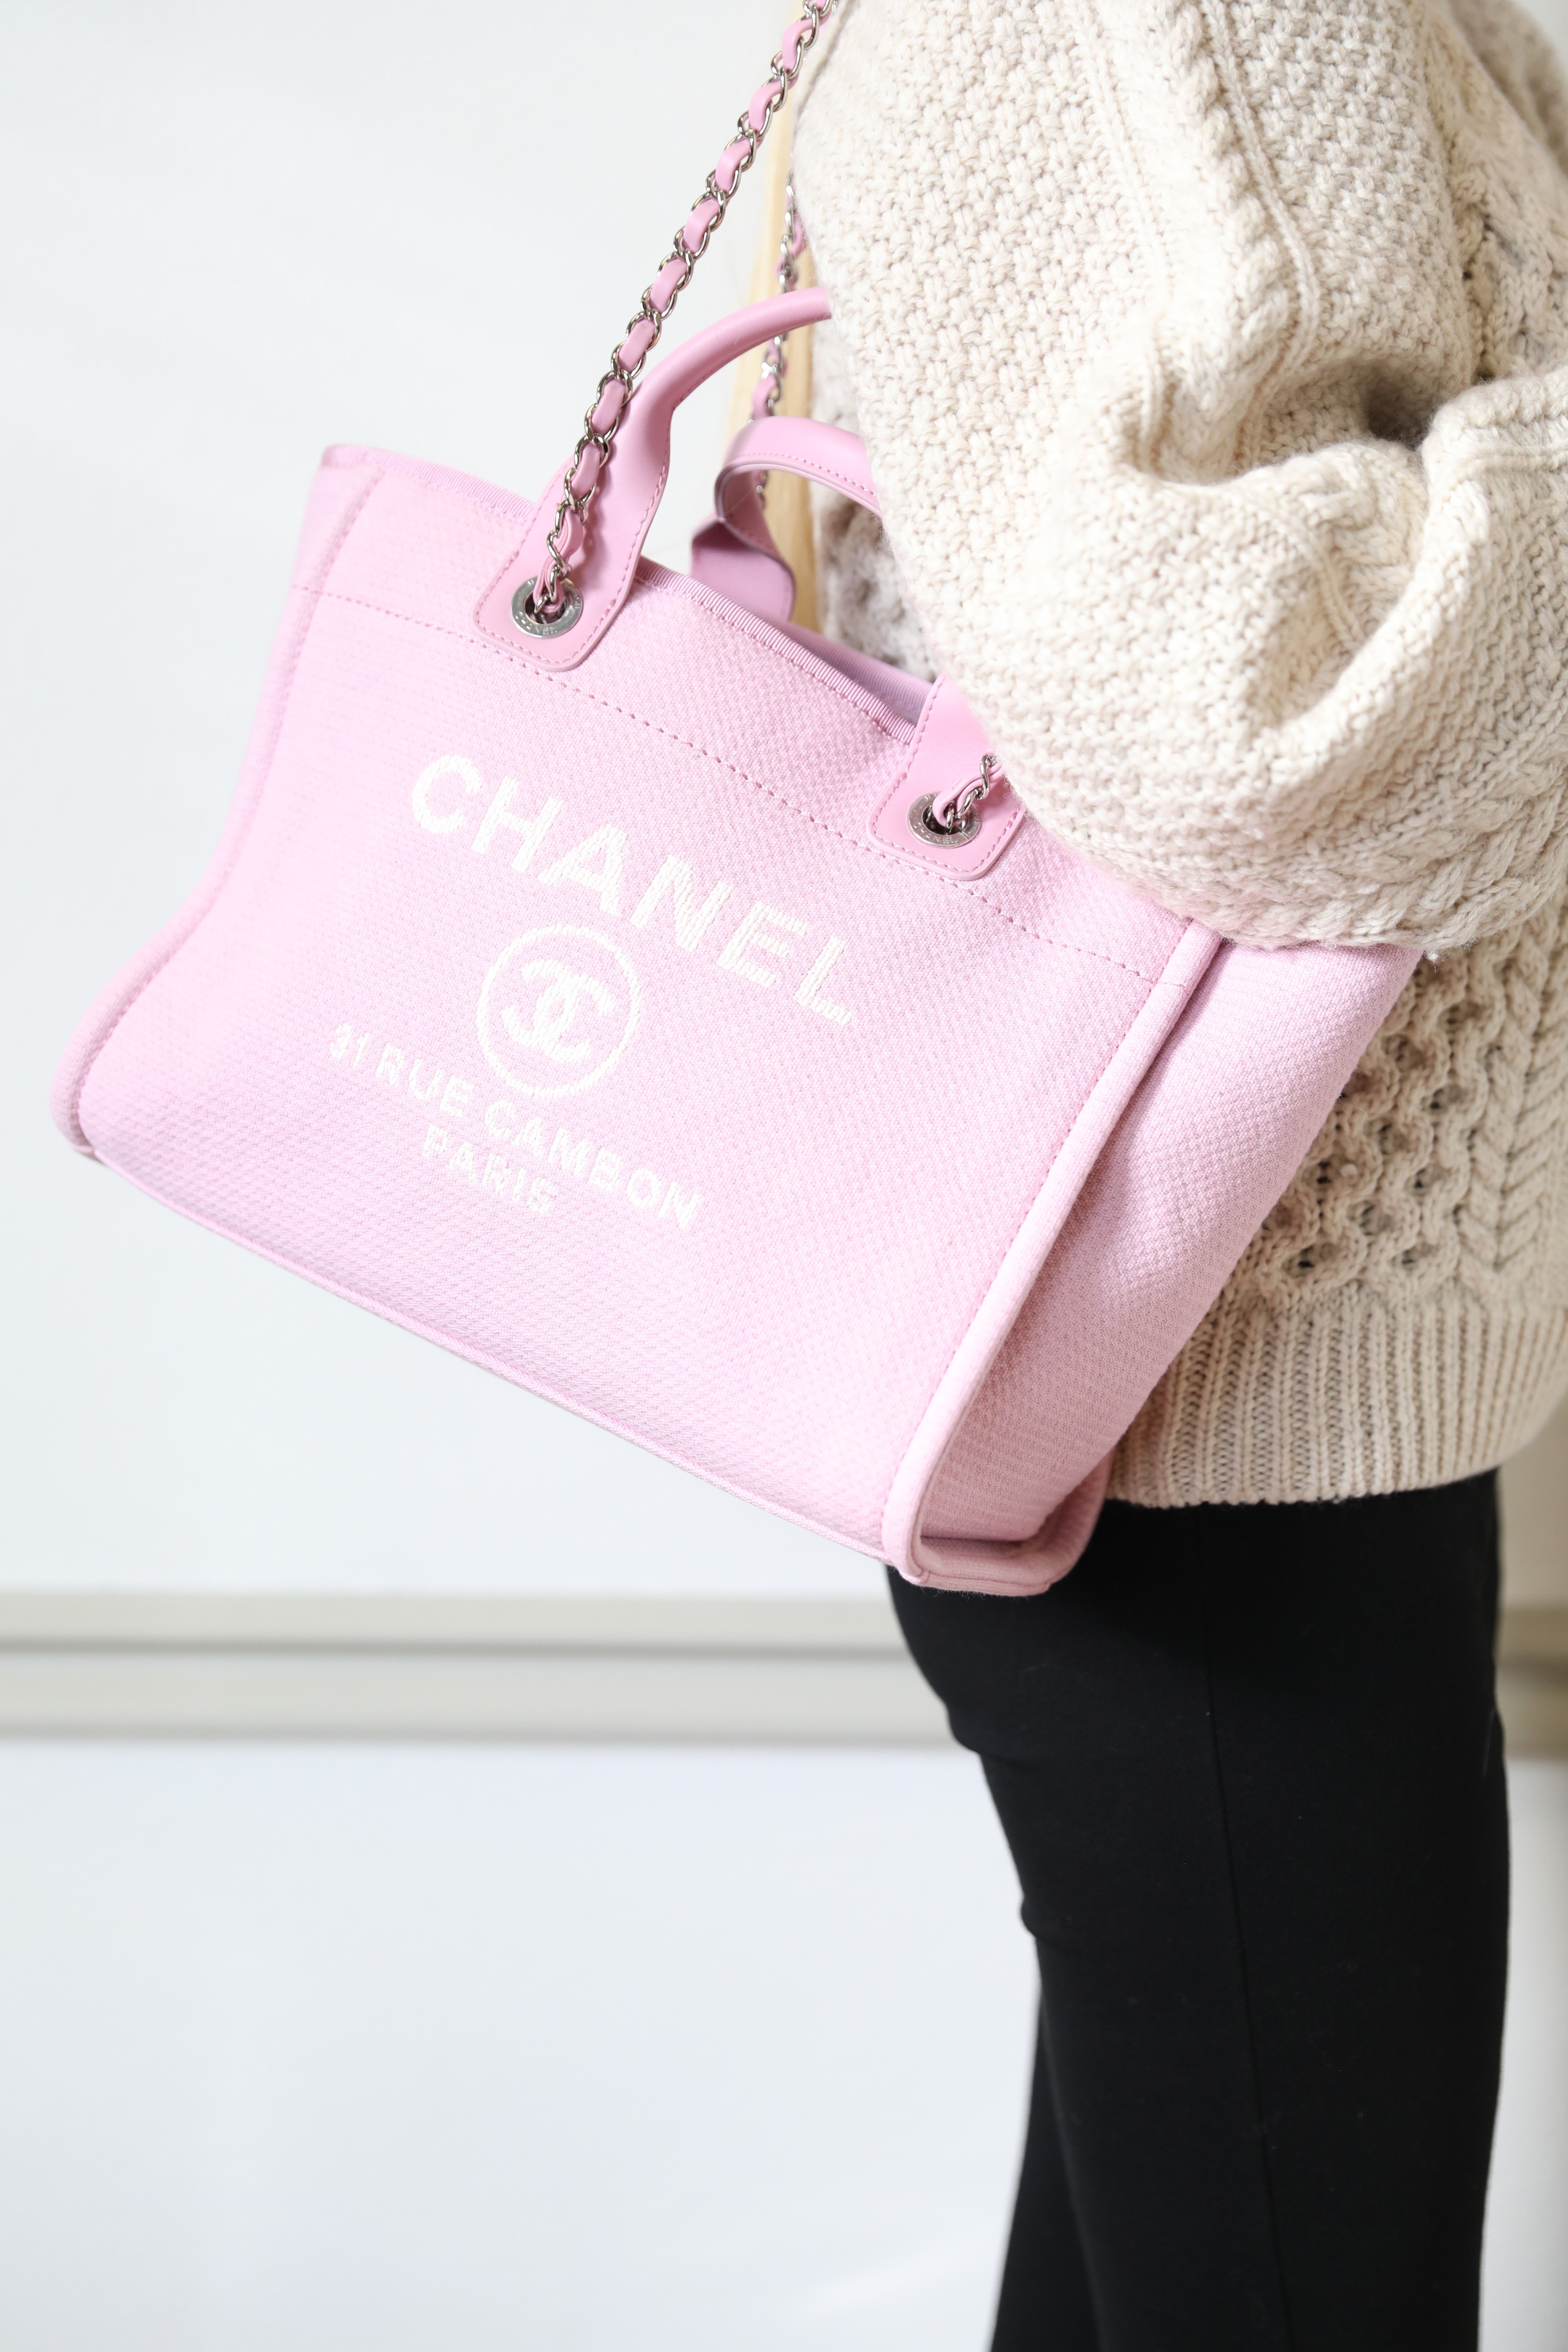 chanel deauville small